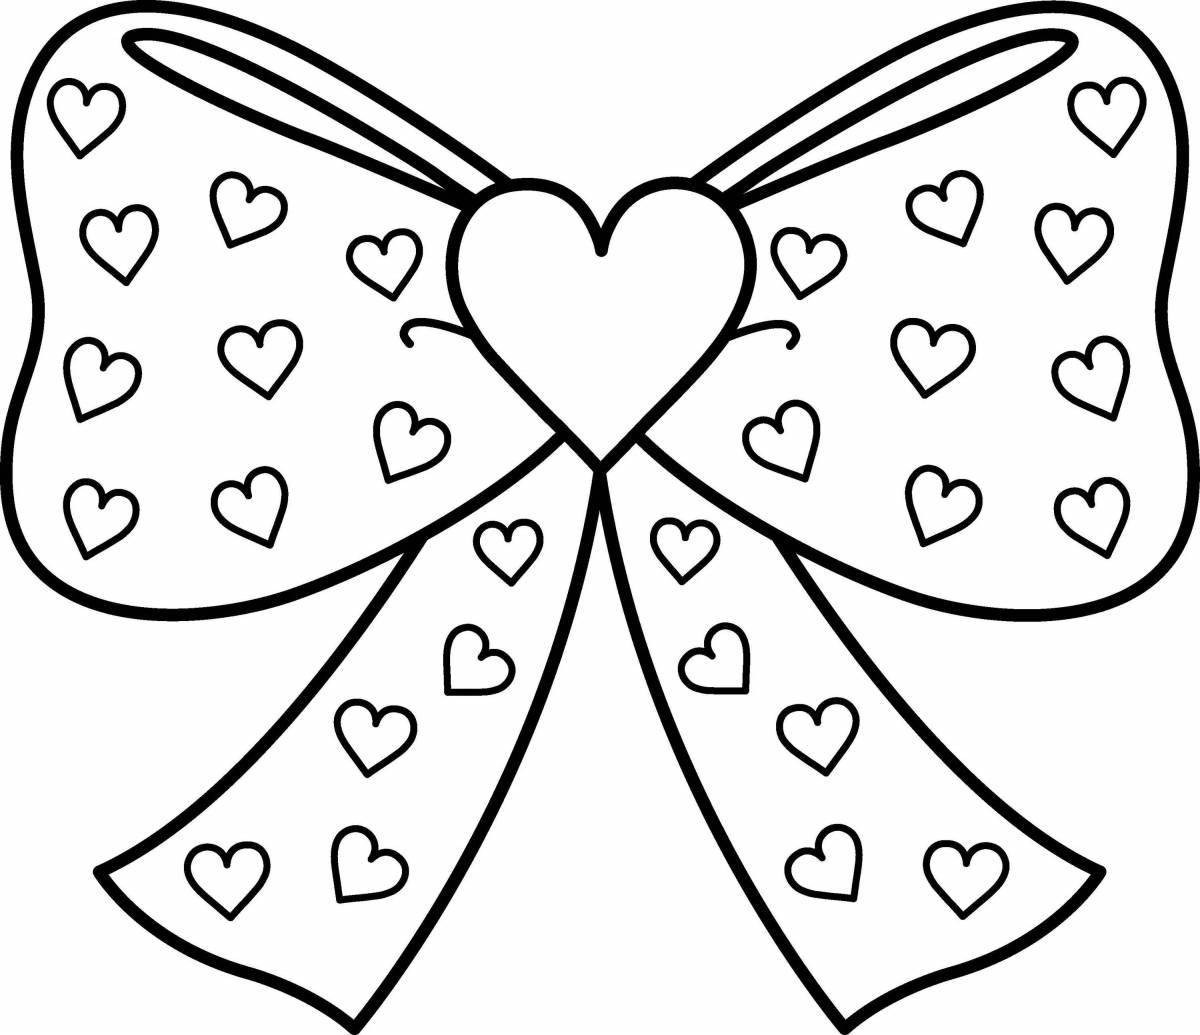 Playful heart coloring page for toddlers